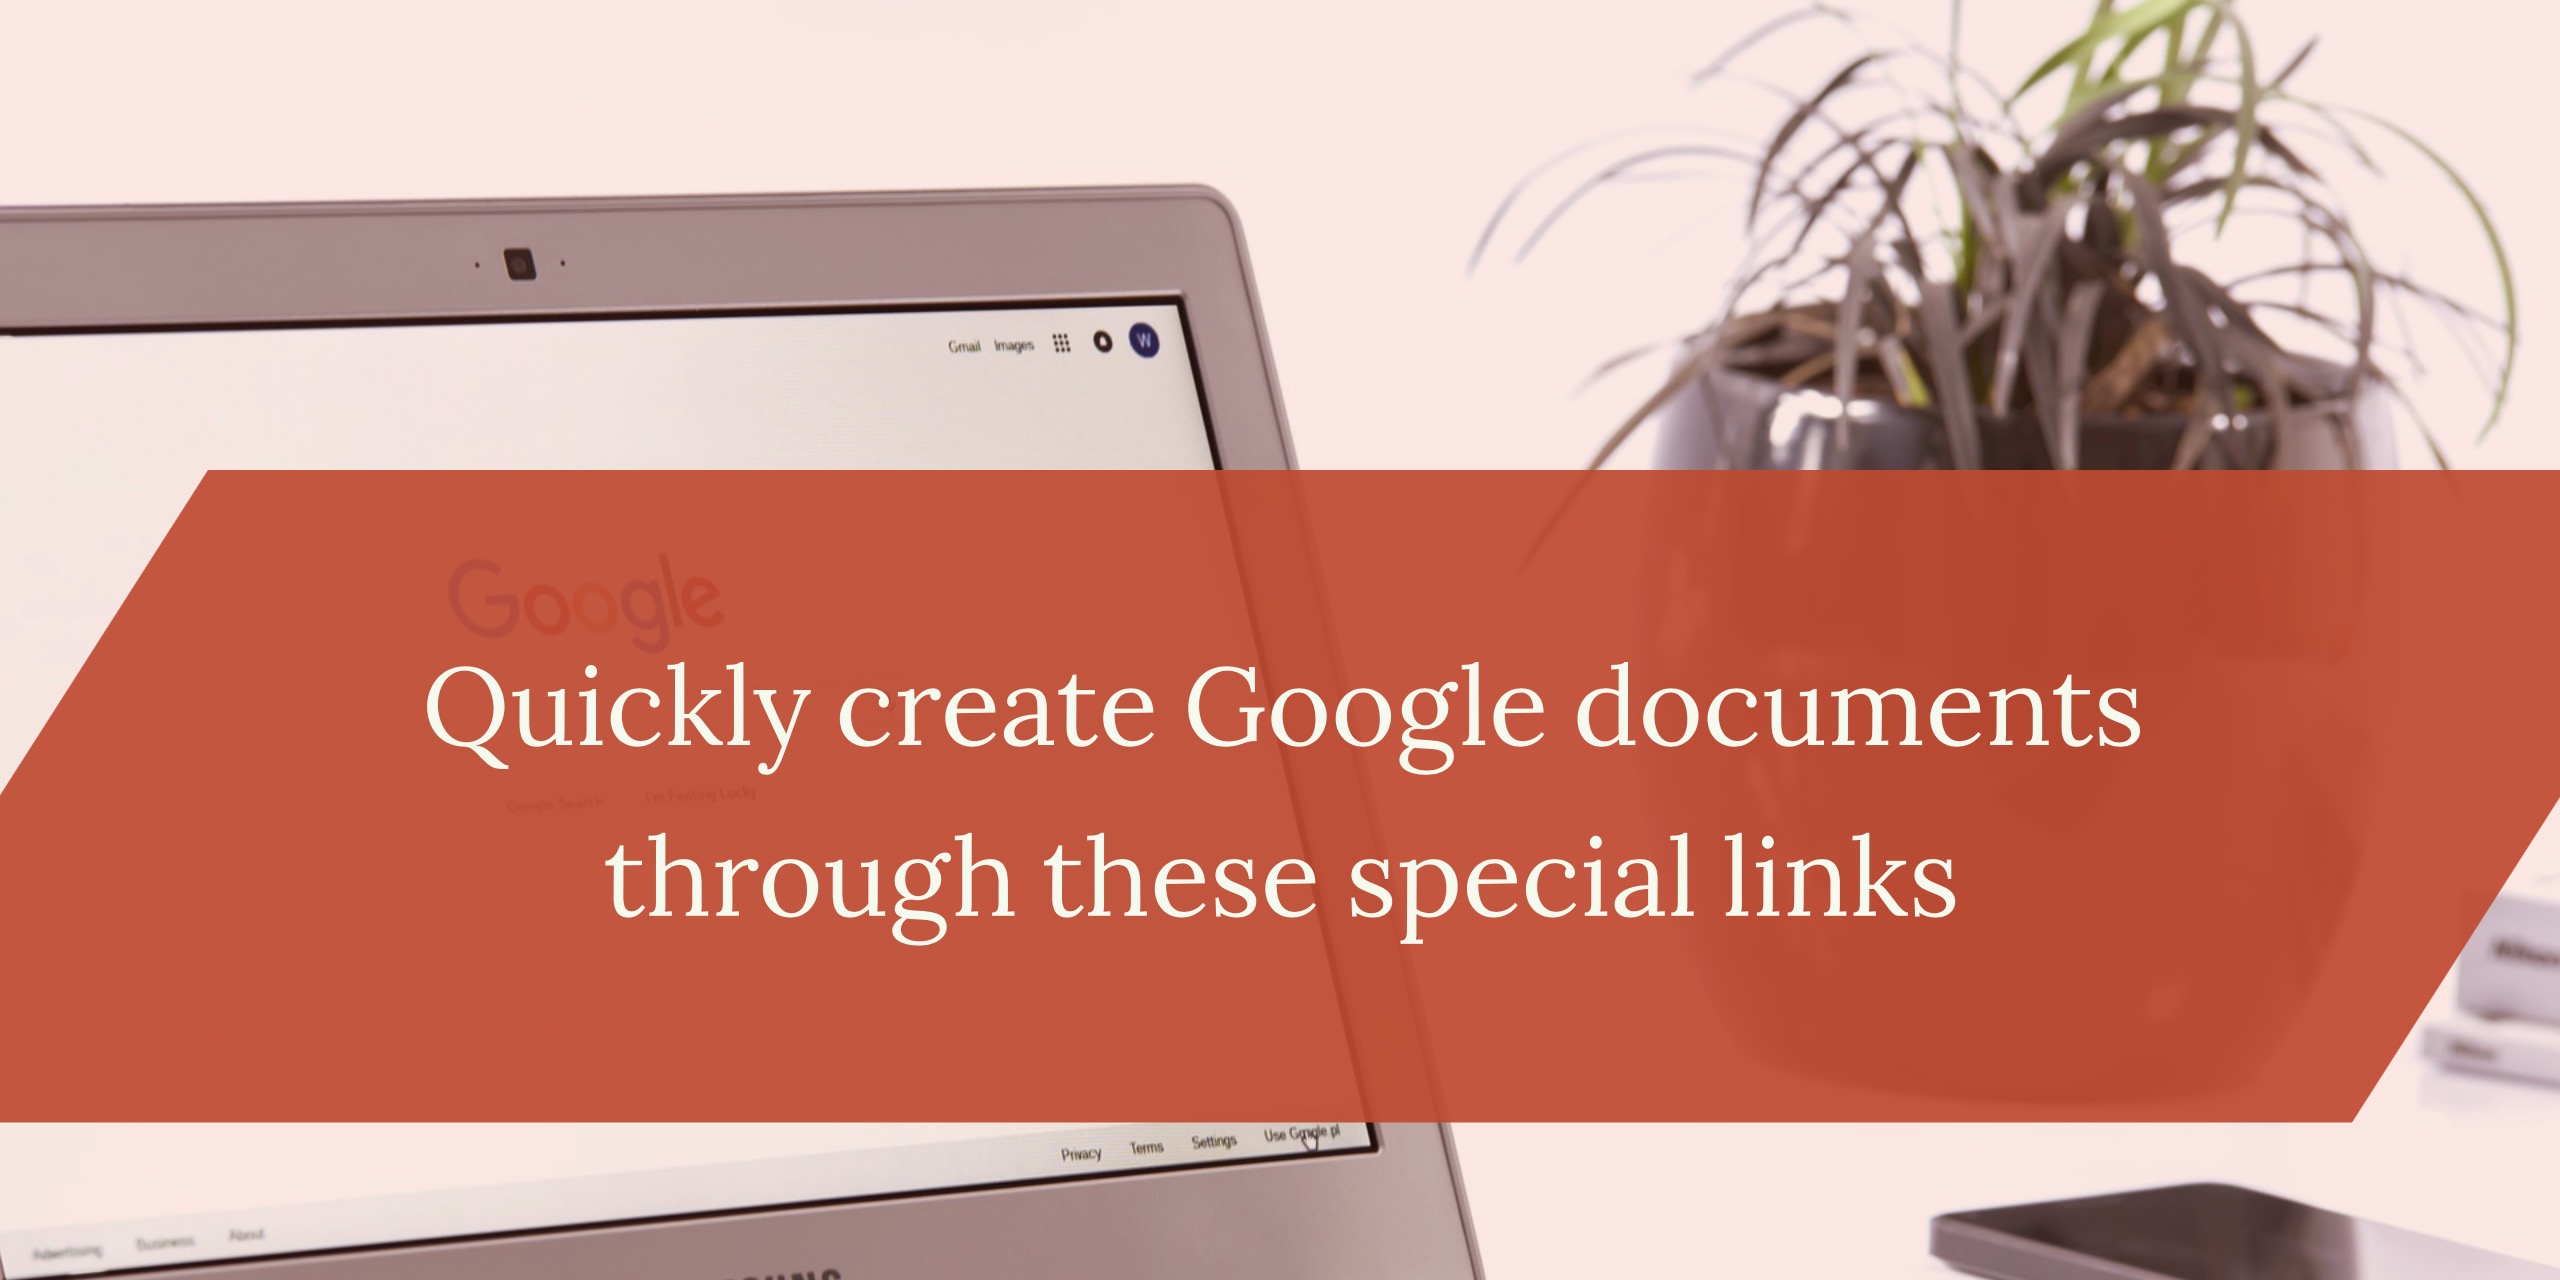 Quickly create Google documents through these special links